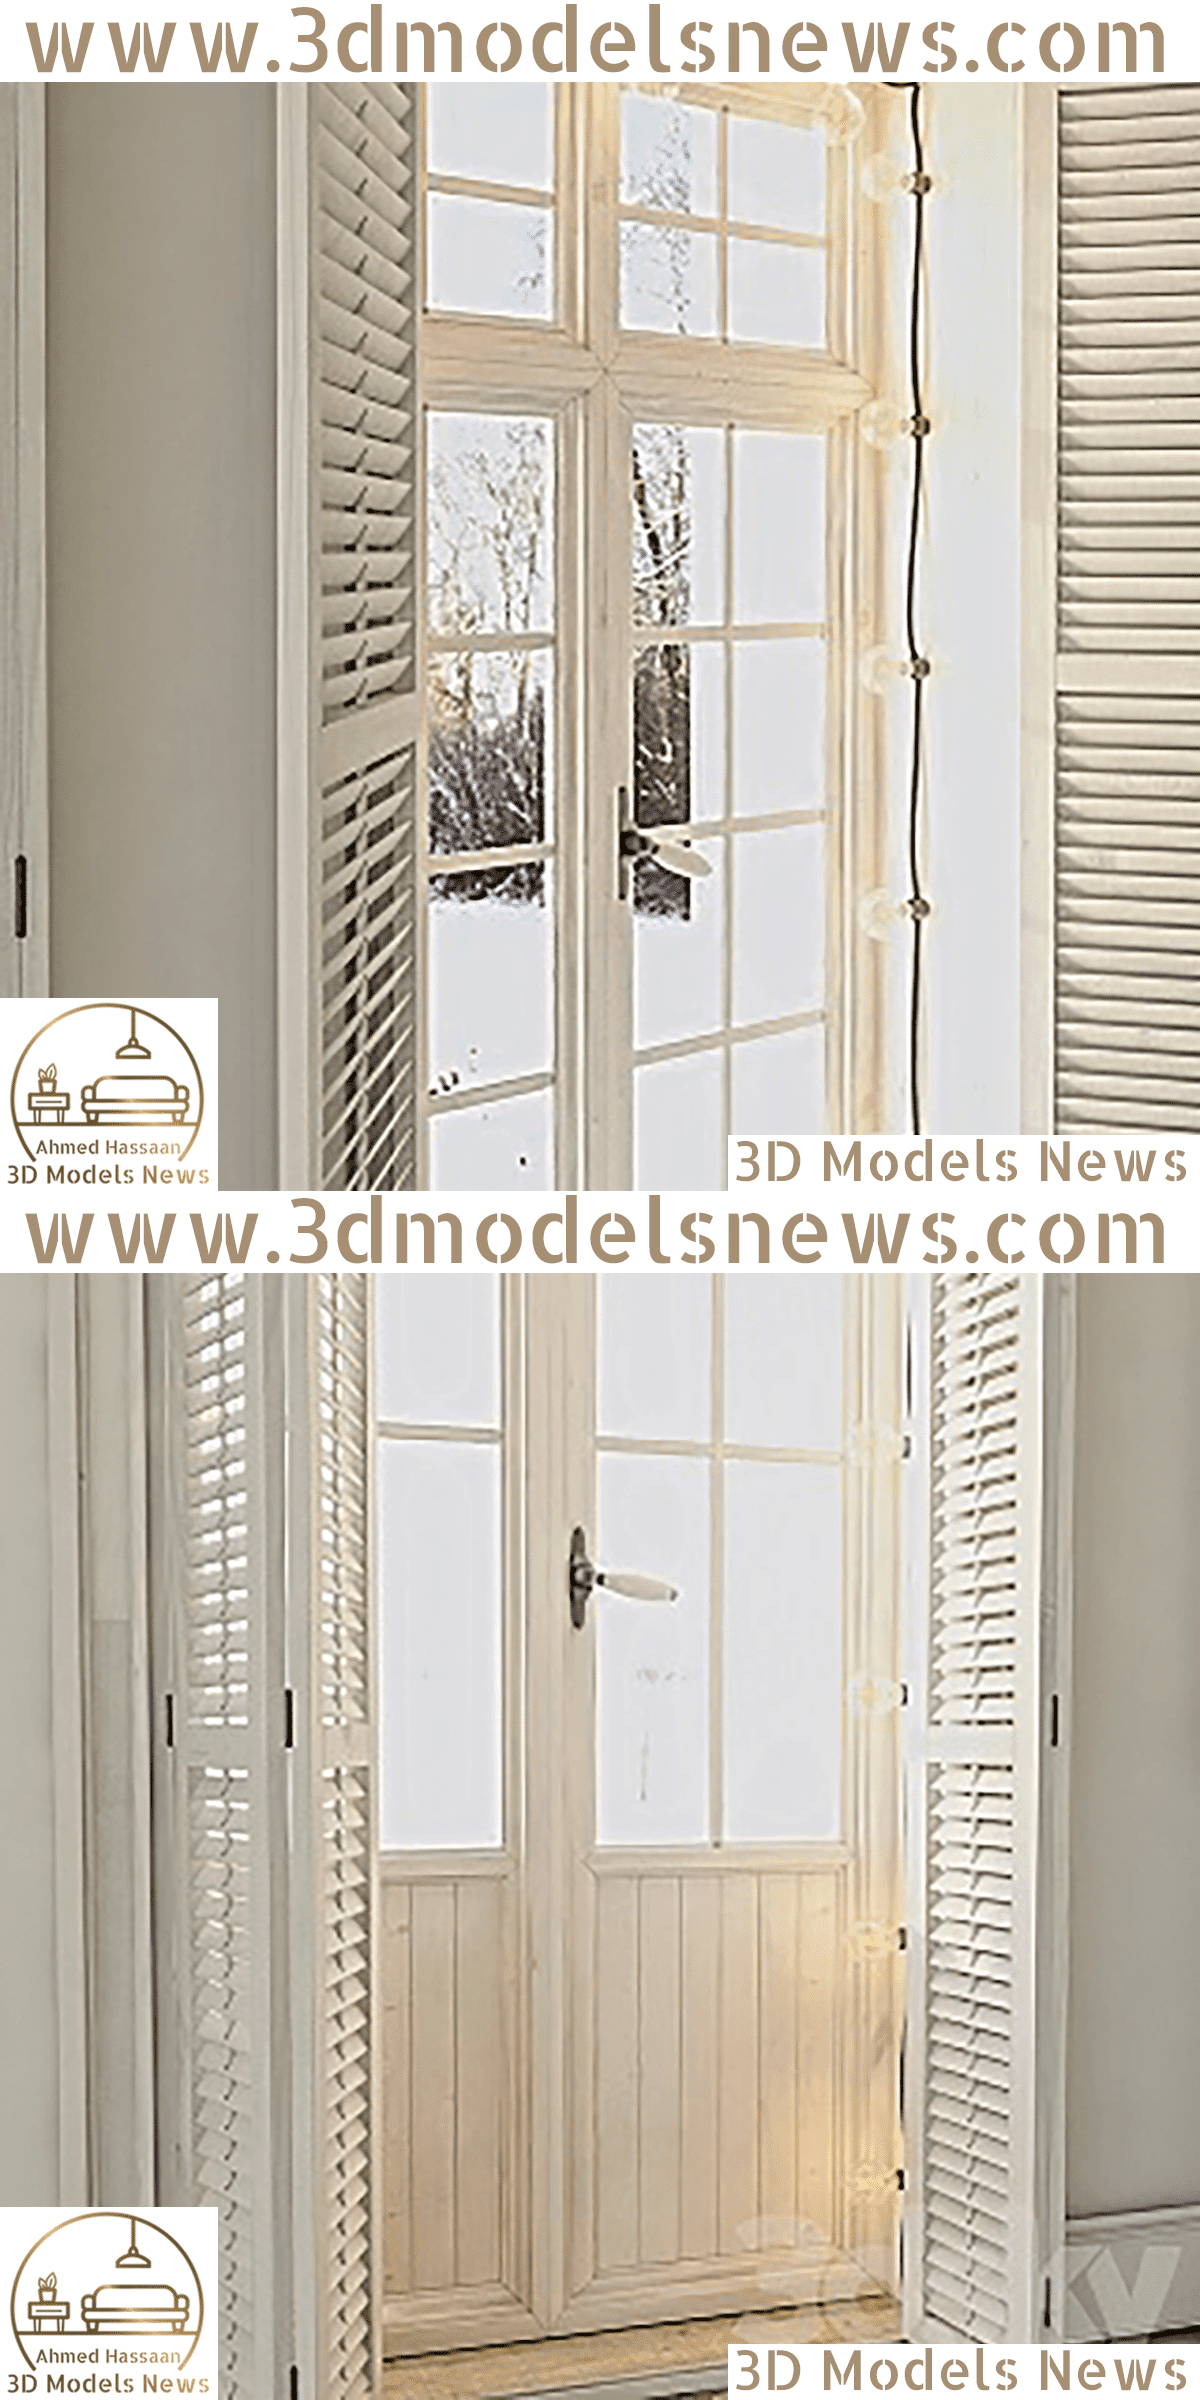 Model Windows With Shutters and Backlight 1